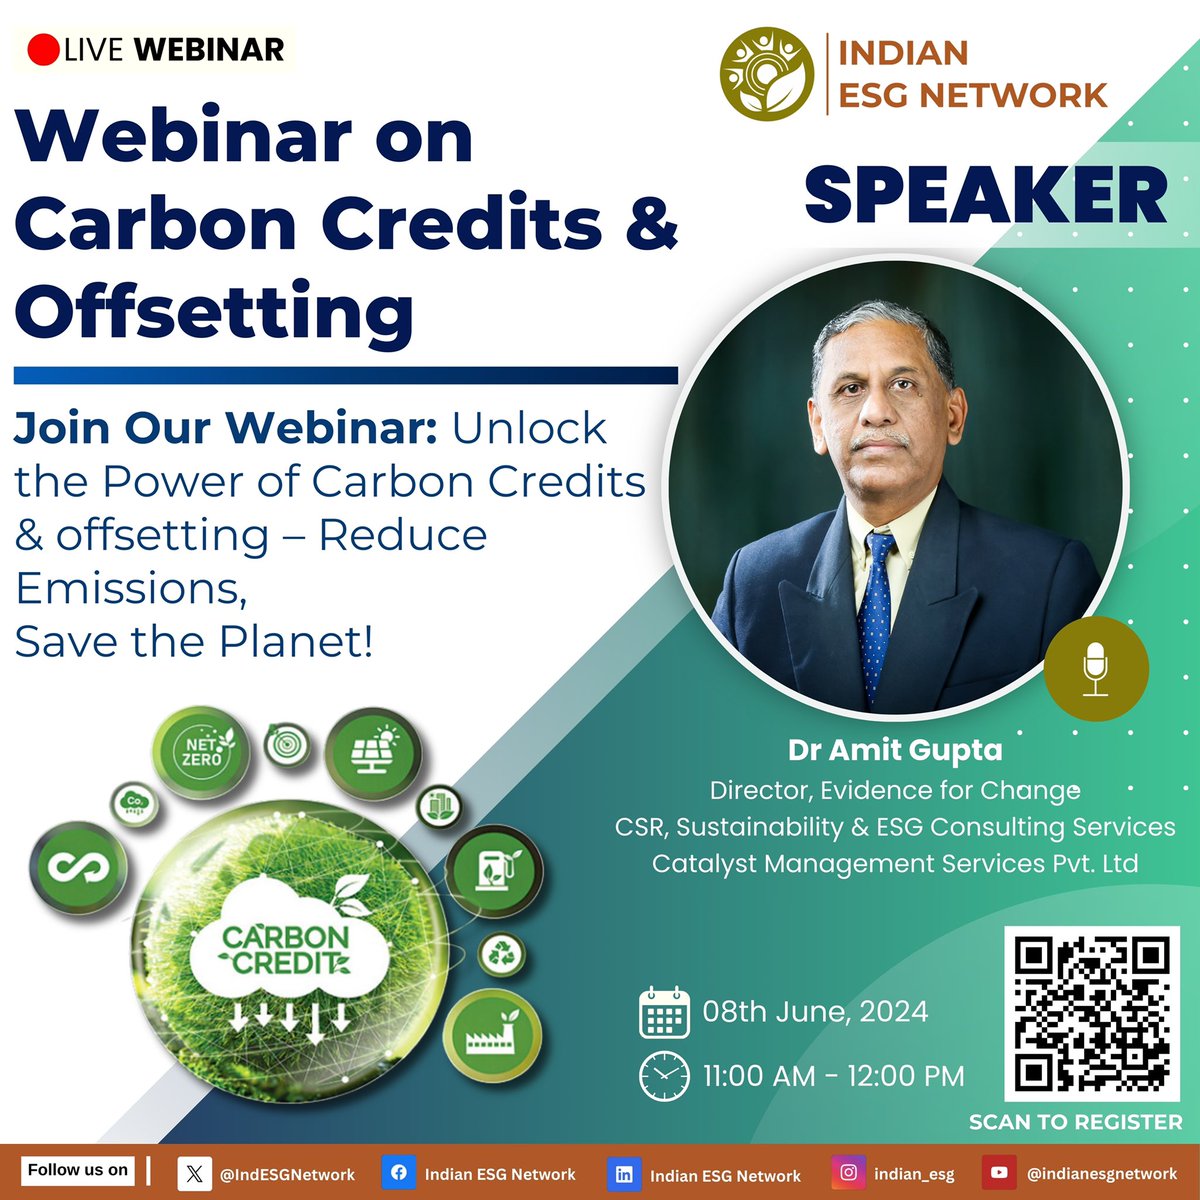 🌿 Exciting News! 🌿 We're thrilled to announce our upcoming webinar on Carbon Credits & Offsetting, featuring our esteemed speaker, Dr Amit Gupta! 📅 Date: 8th June 2024 🕒 Time: 11am-12 noon #CarbonCredits #Offsetting #Sustainability #ESG #ClimateAction #IndianESGNetwork